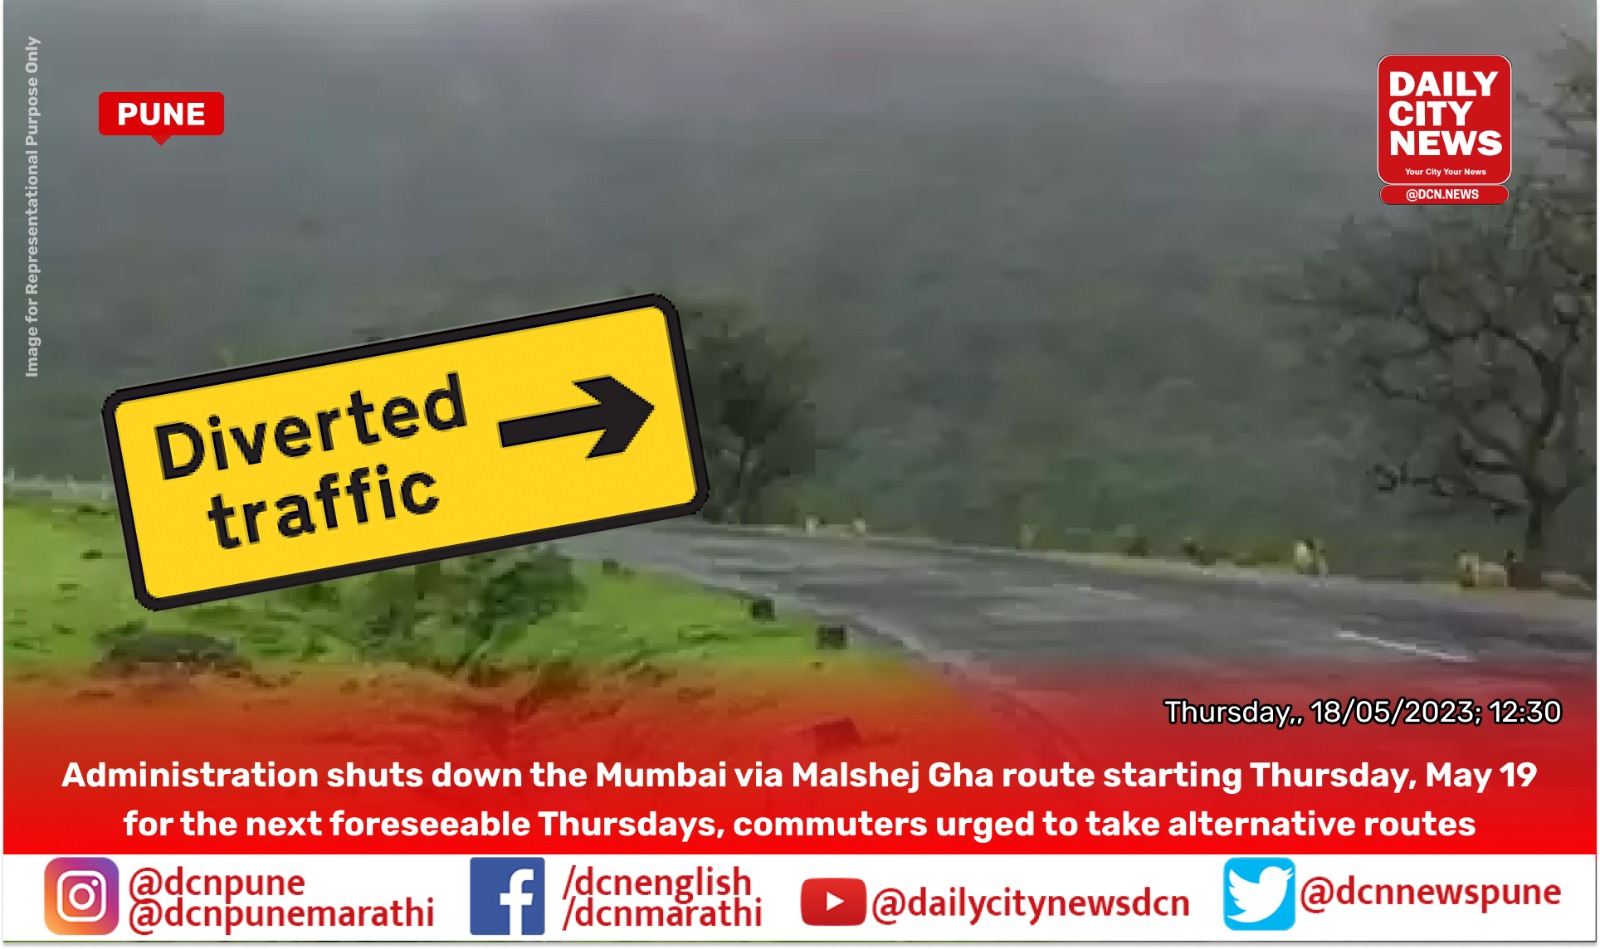 Administration shuts down the Mumbai via Malshej Gha route starting Thursday, May 19 for the next foreseeable Thursdays, commuters urged to take alternative routes